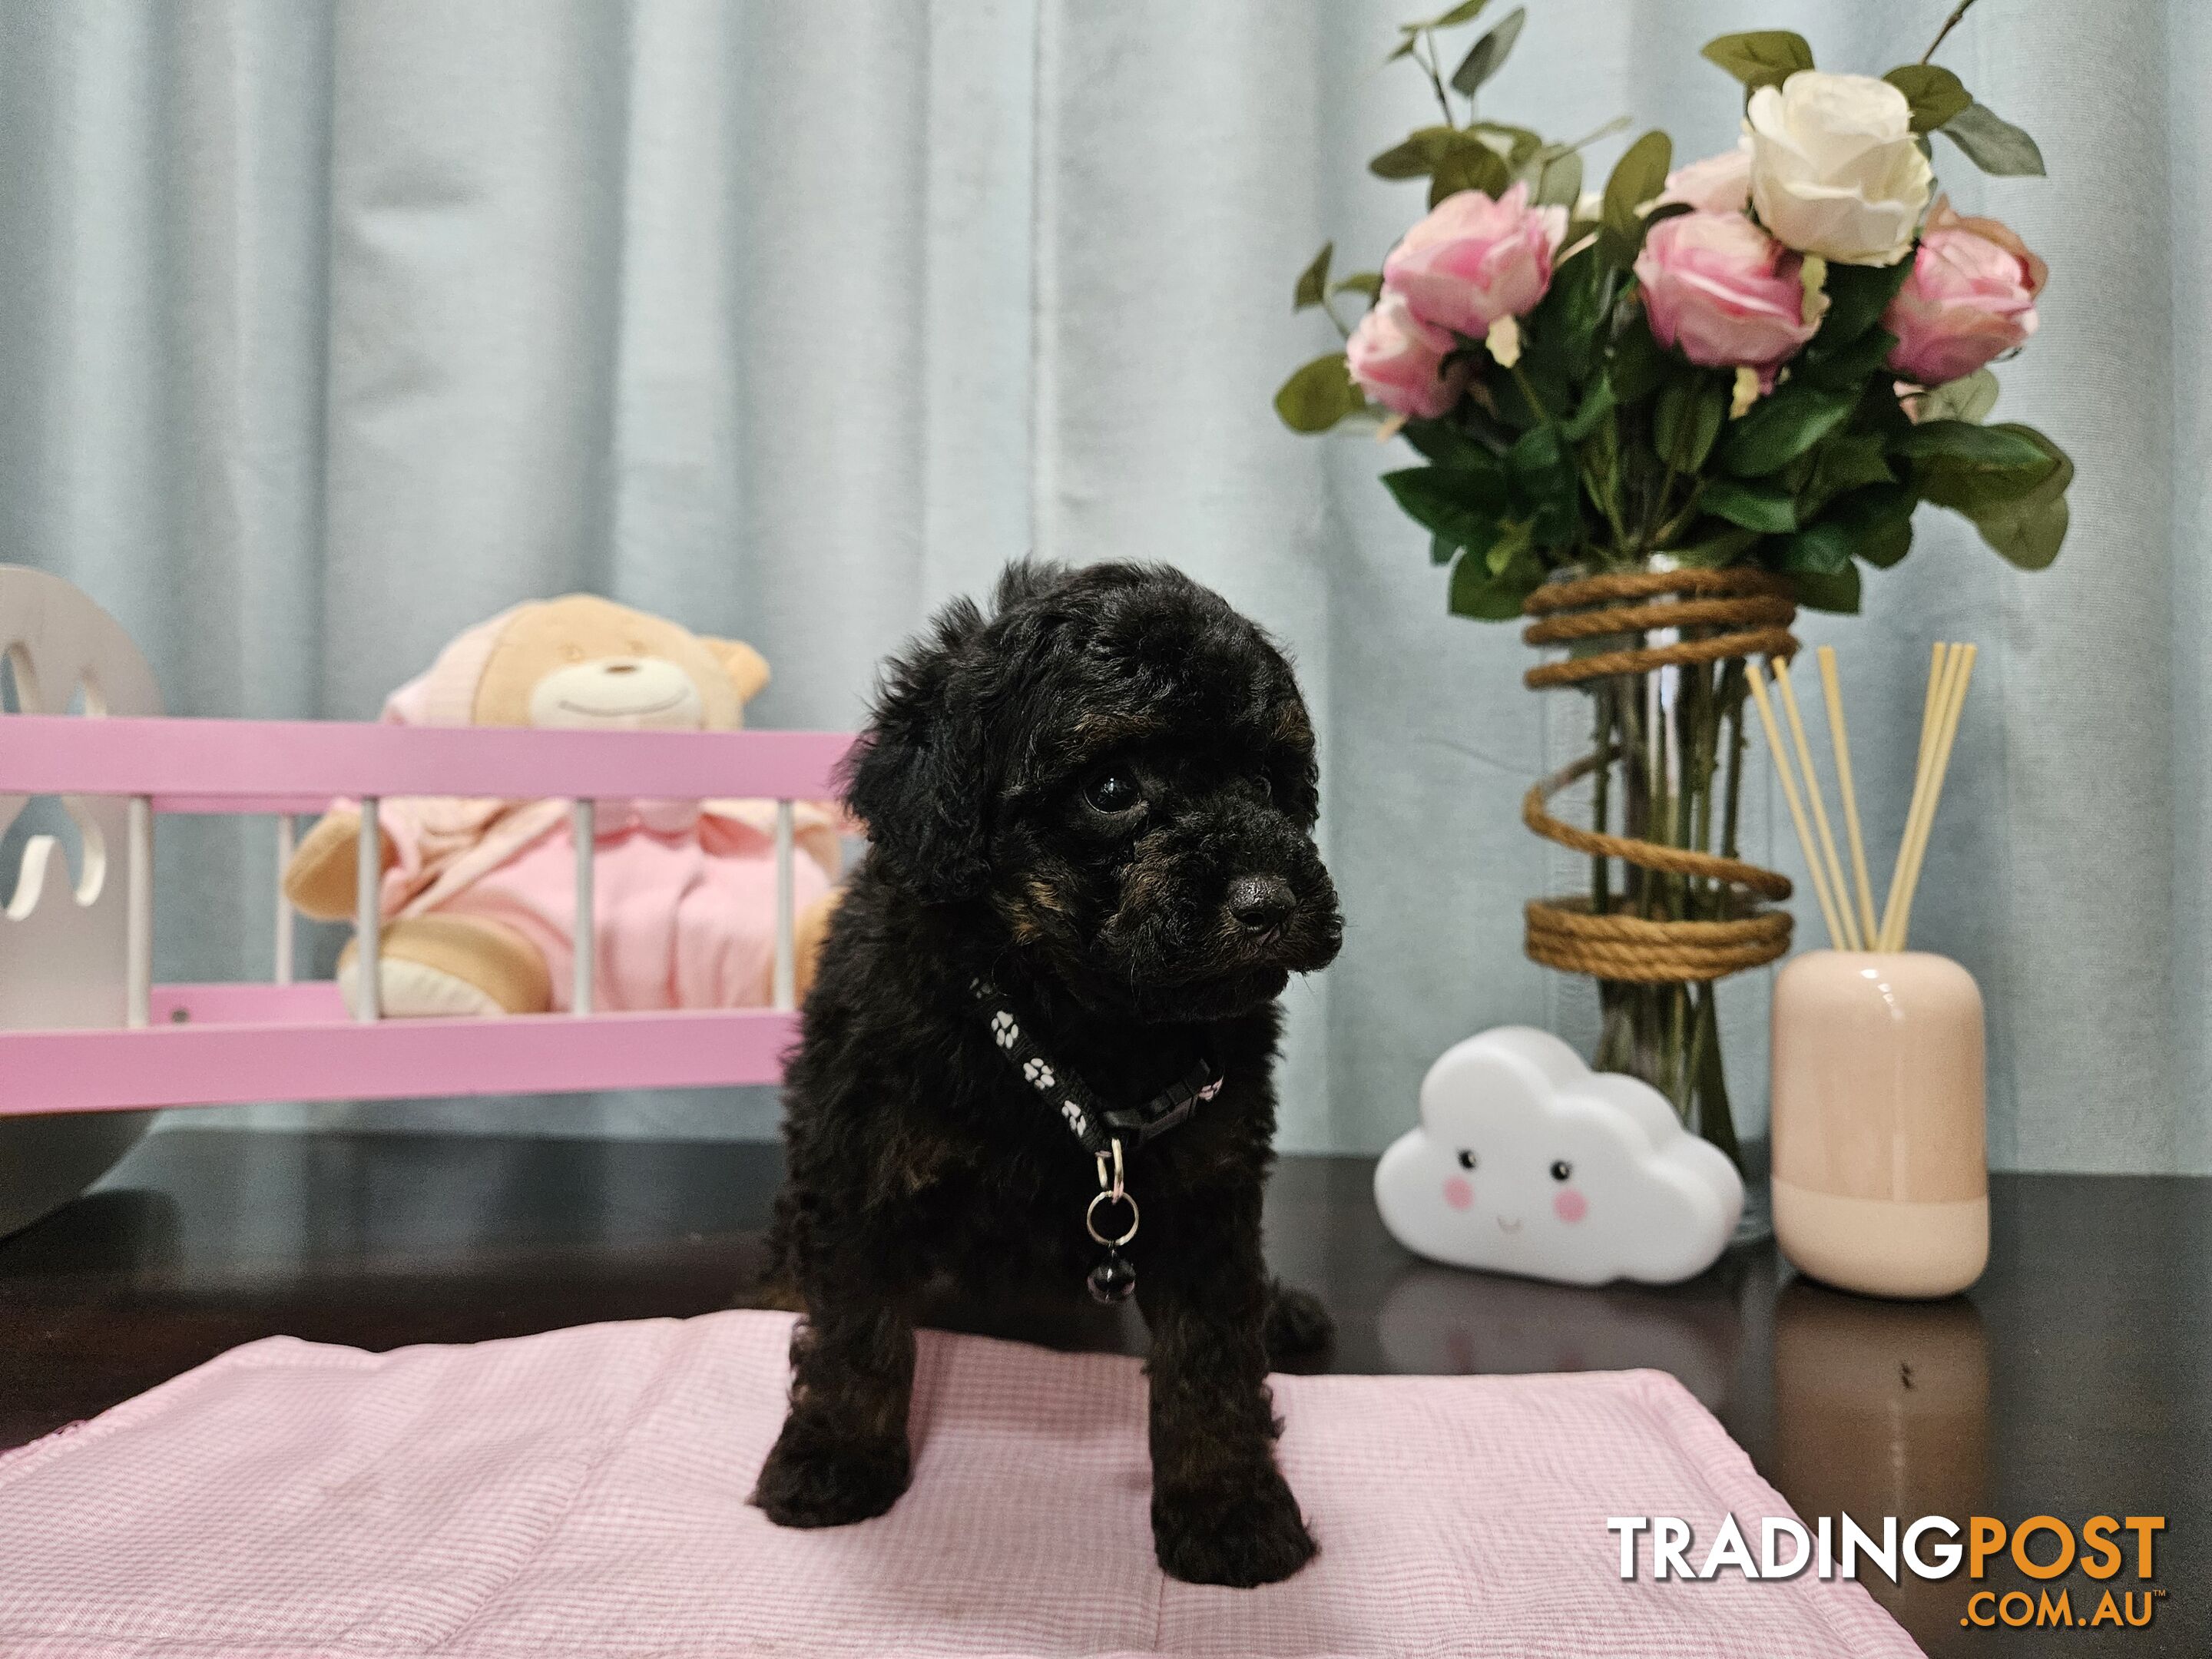 PUREBRED TOY POODLE